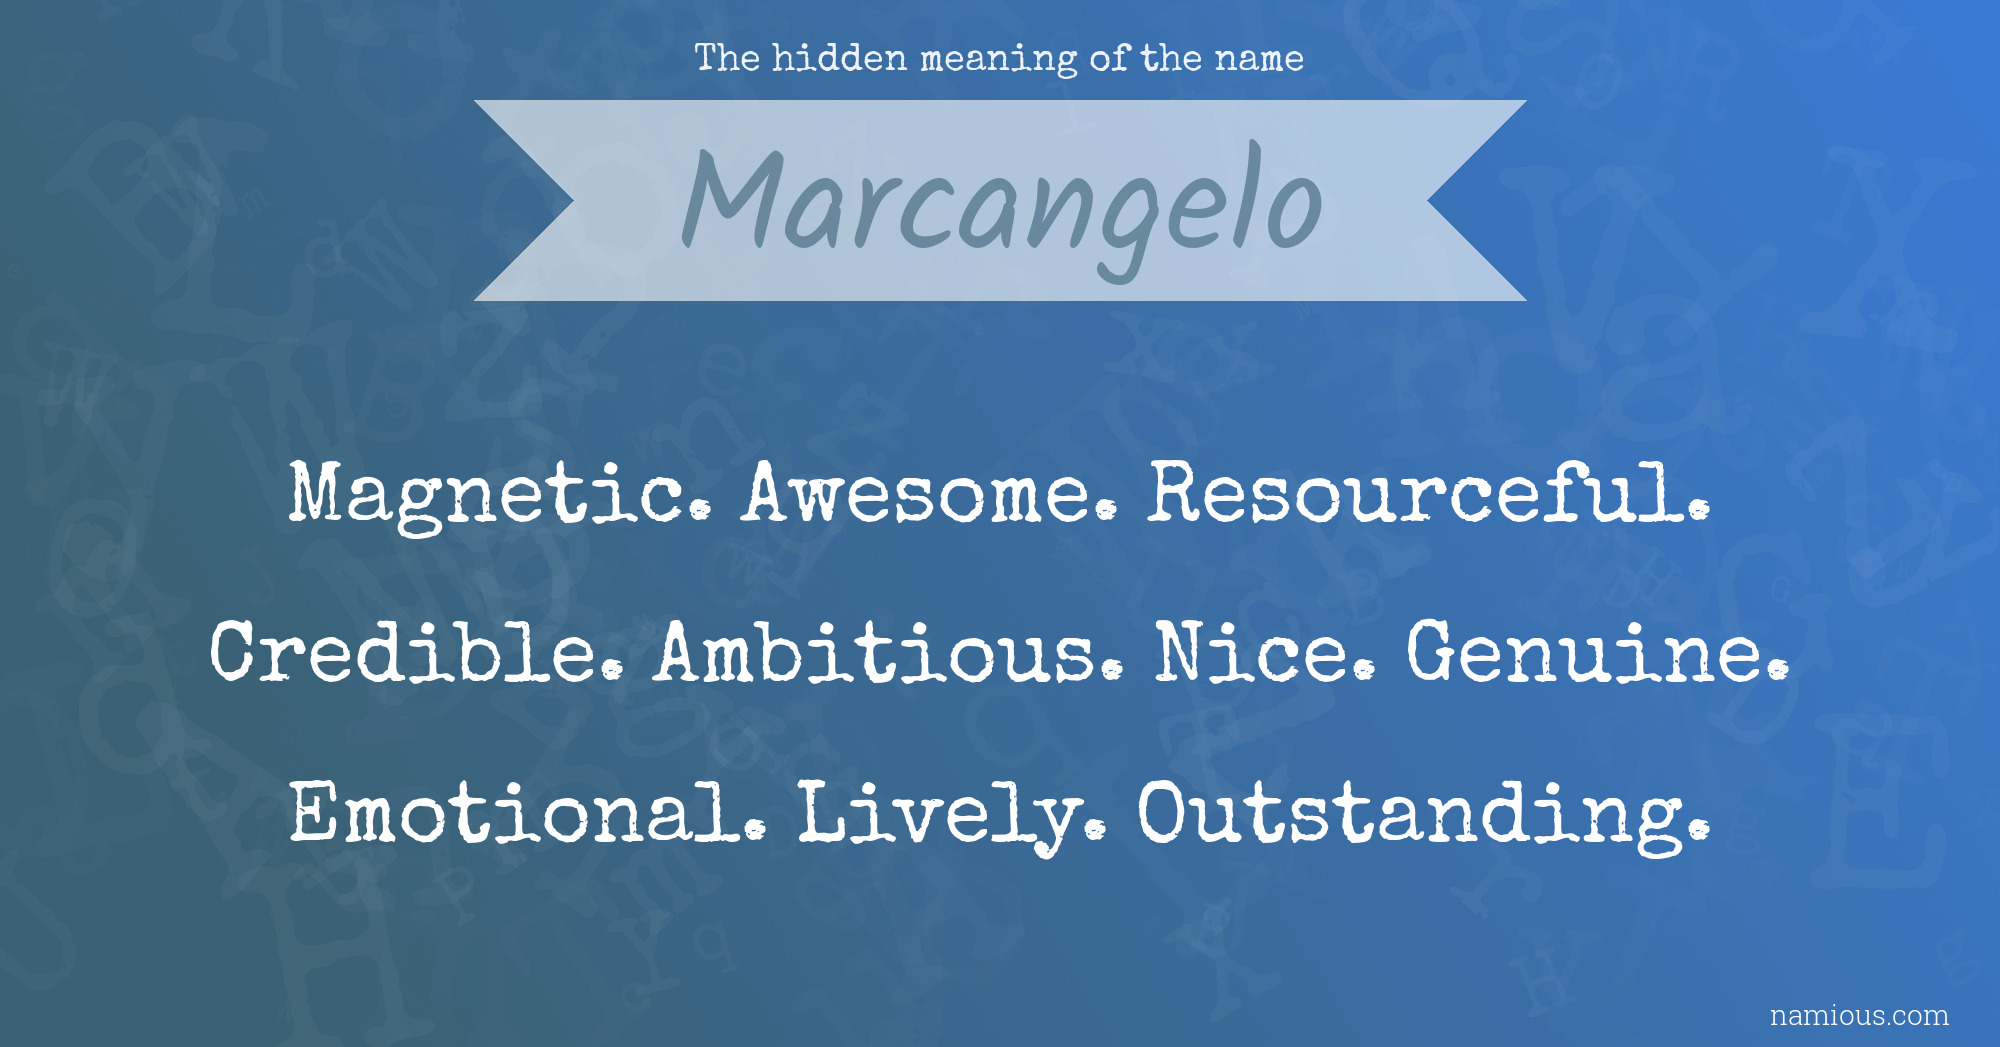 The hidden meaning of the name Marcangelo